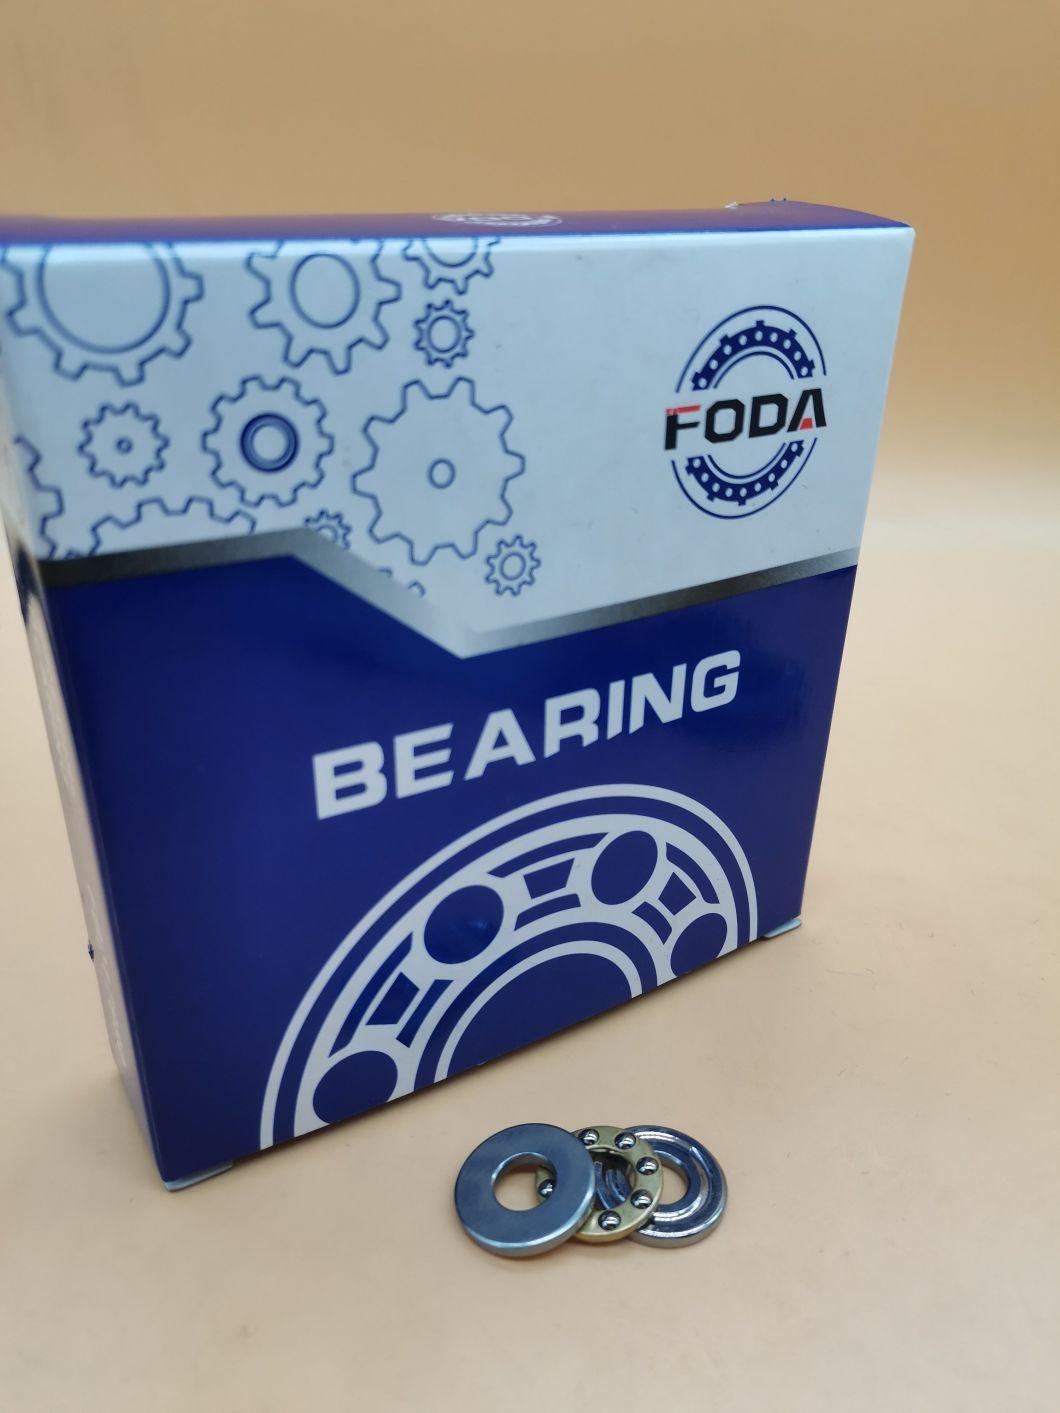 Unidirectional Thrust Ball Bearings/Low Speed Reducer/Foda High Quality Bearings Instead of Koyo Bearings/Thrust Ball Bearings of 51411